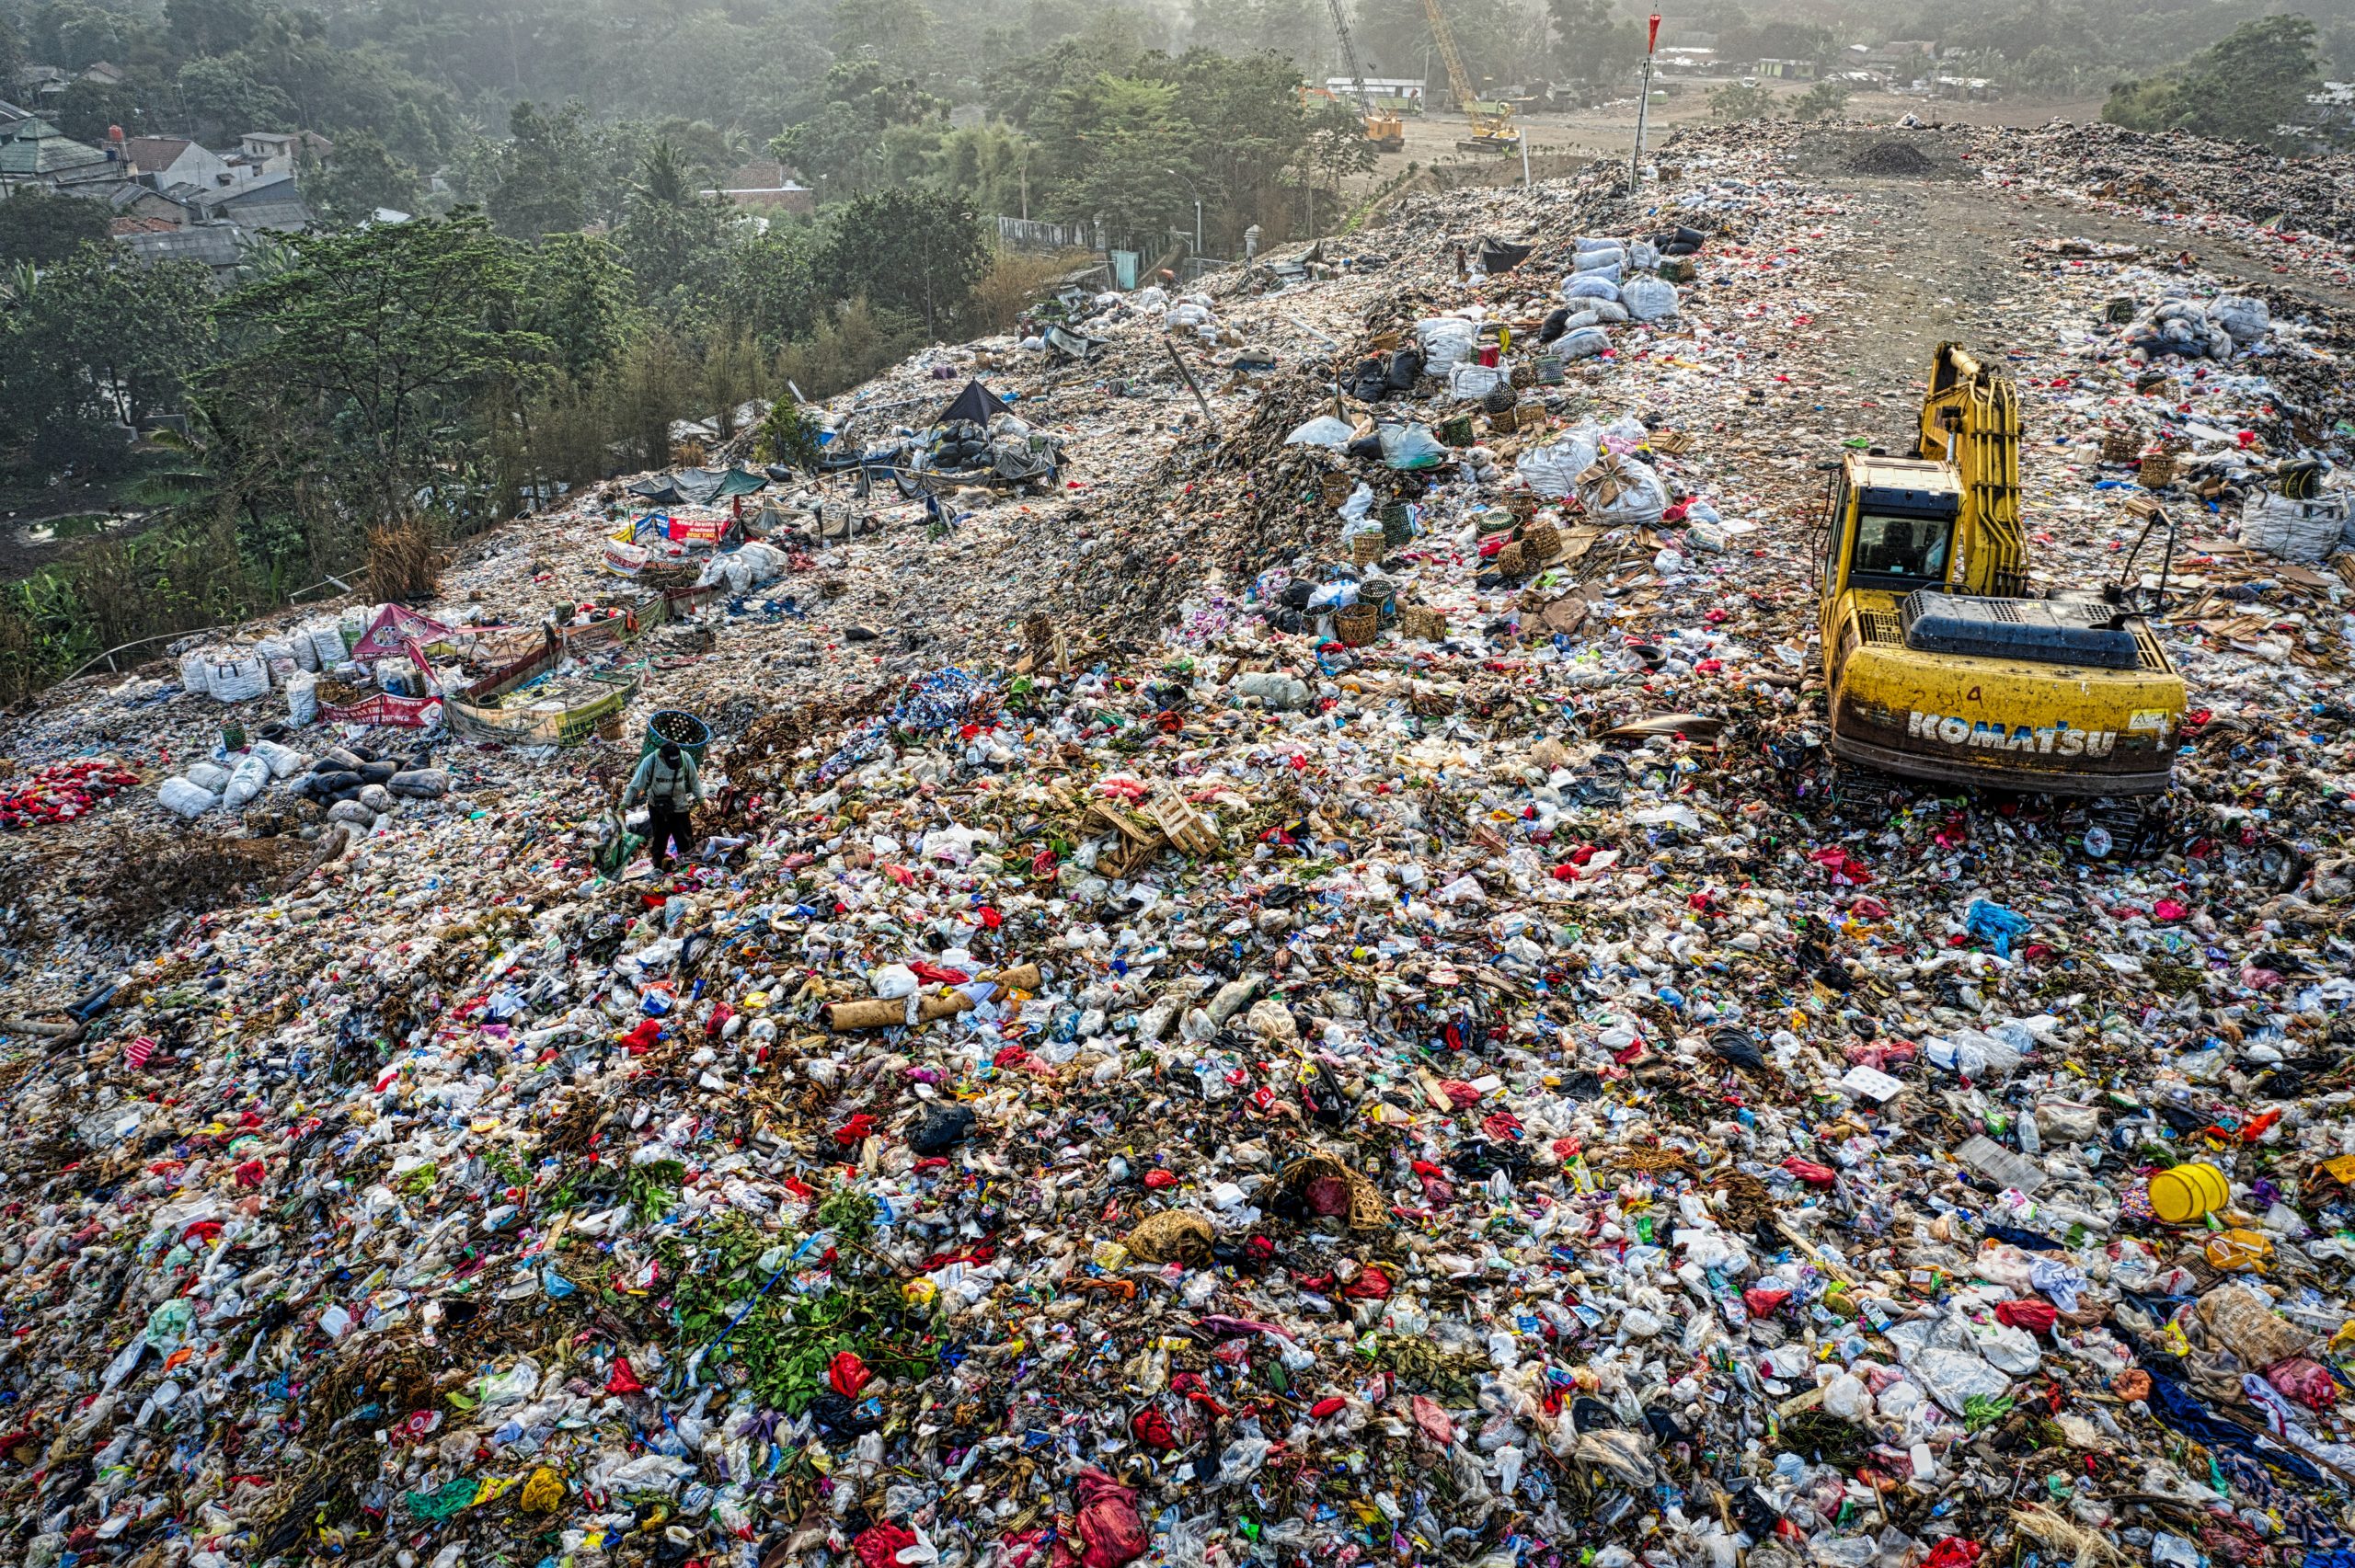 Landfill mining at the “Global Cleaner Production & Sustainable Consumption Conference”